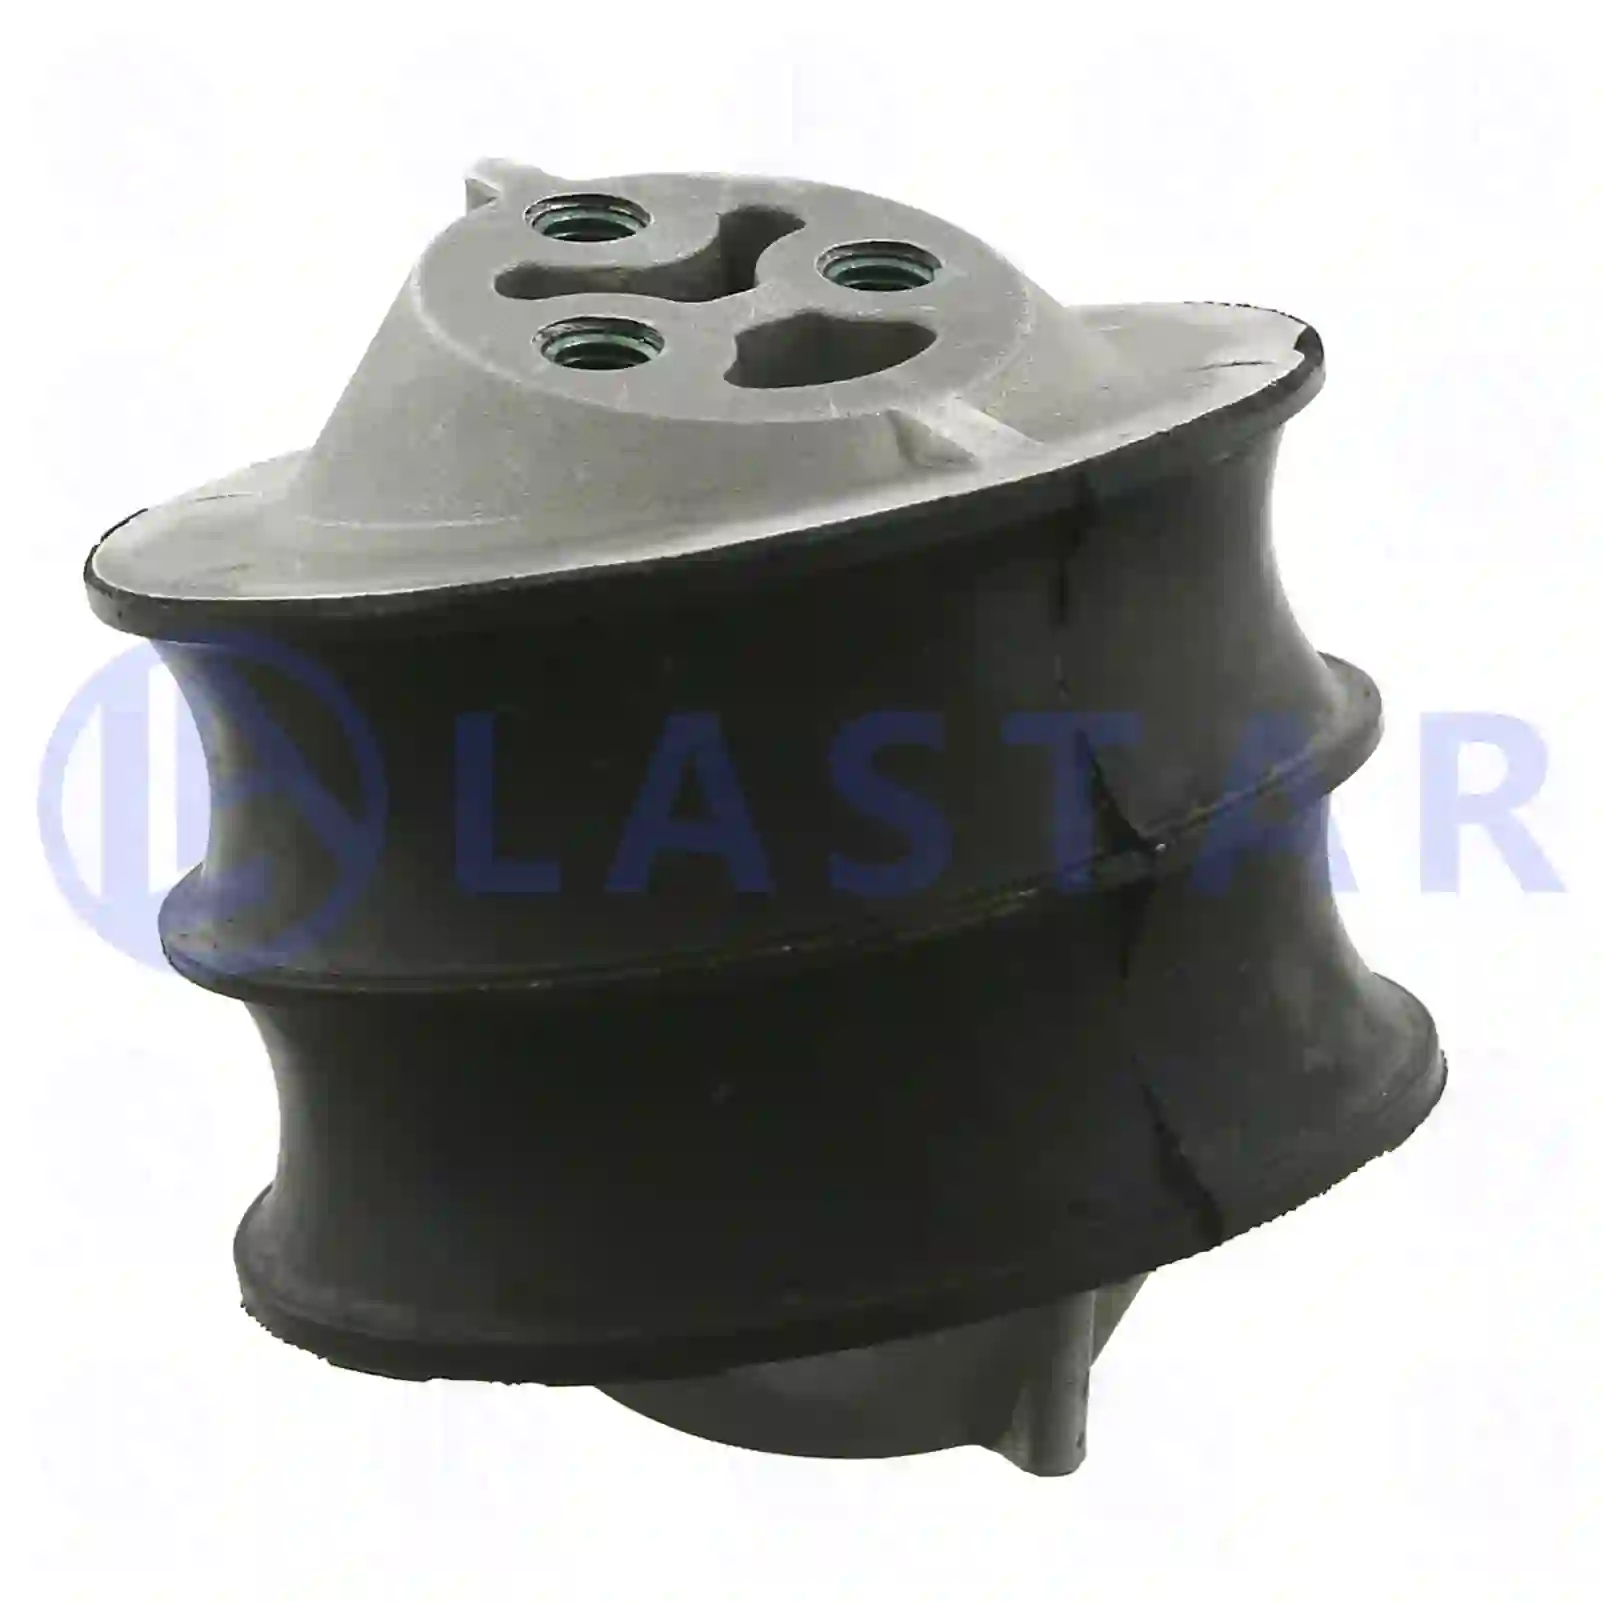 Rubber mounting, marked: red, 77702749, 1469277, 1496749, 1778532, 2377037, ZG40110-0008 ||  77702749 Lastar Spare Part | Truck Spare Parts, Auotomotive Spare Parts Rubber mounting, marked: red, 77702749, 1469277, 1496749, 1778532, 2377037, ZG40110-0008 ||  77702749 Lastar Spare Part | Truck Spare Parts, Auotomotive Spare Parts